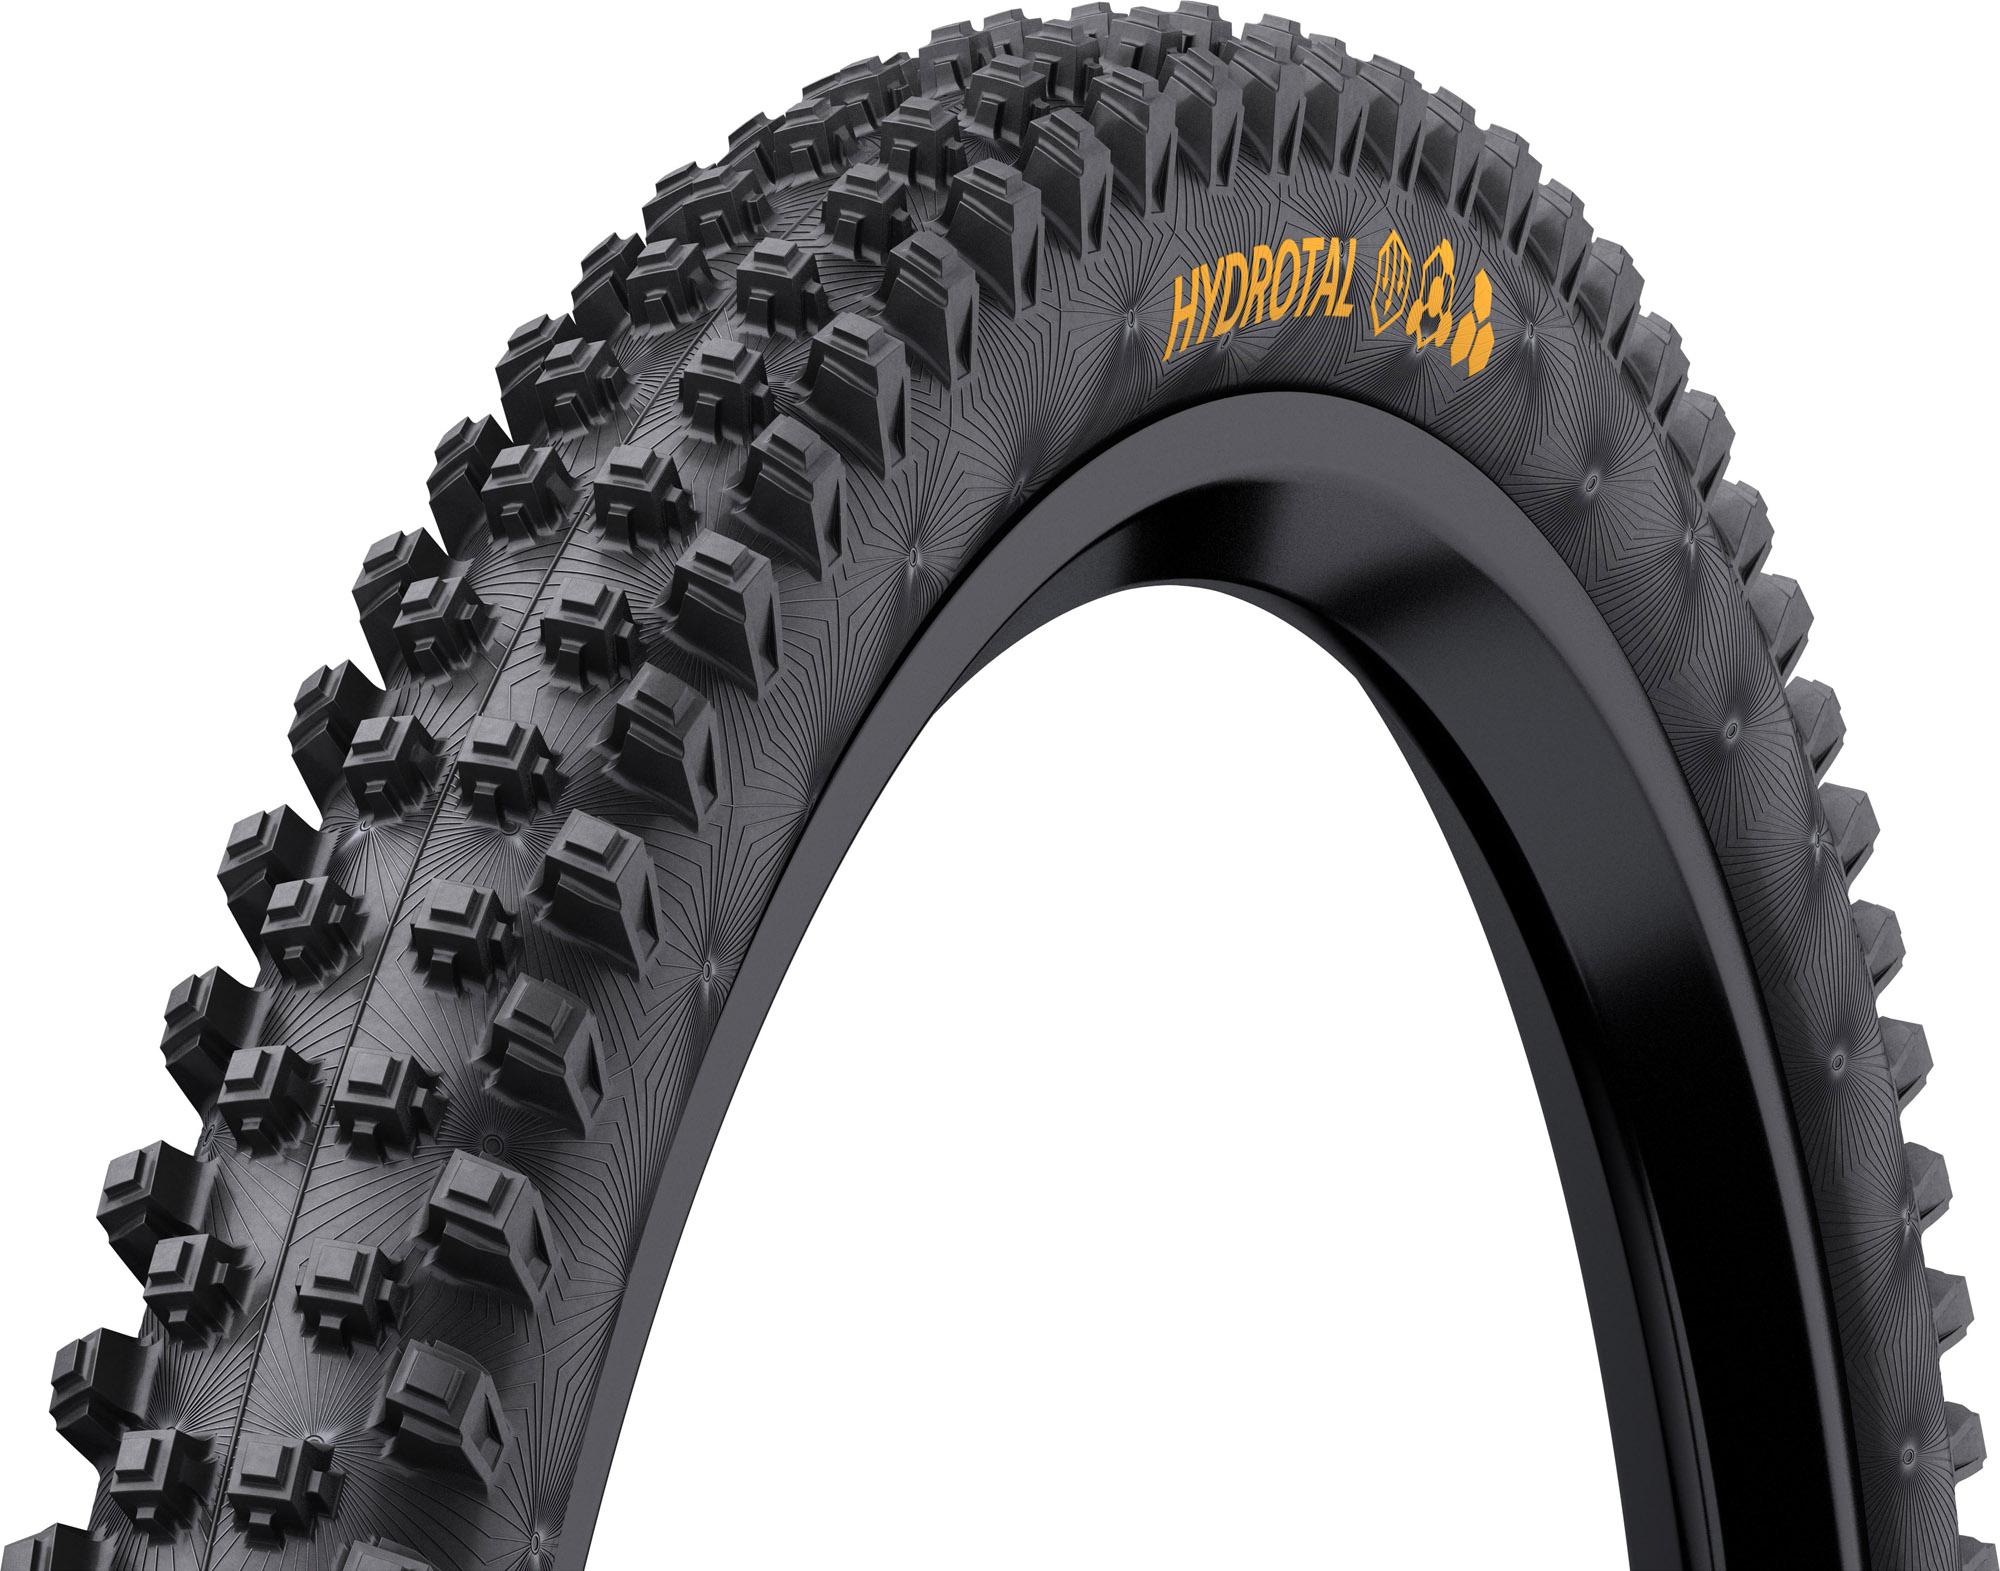 Continental Hydrotal Dh Mtb Tyre - Supersoft  Black